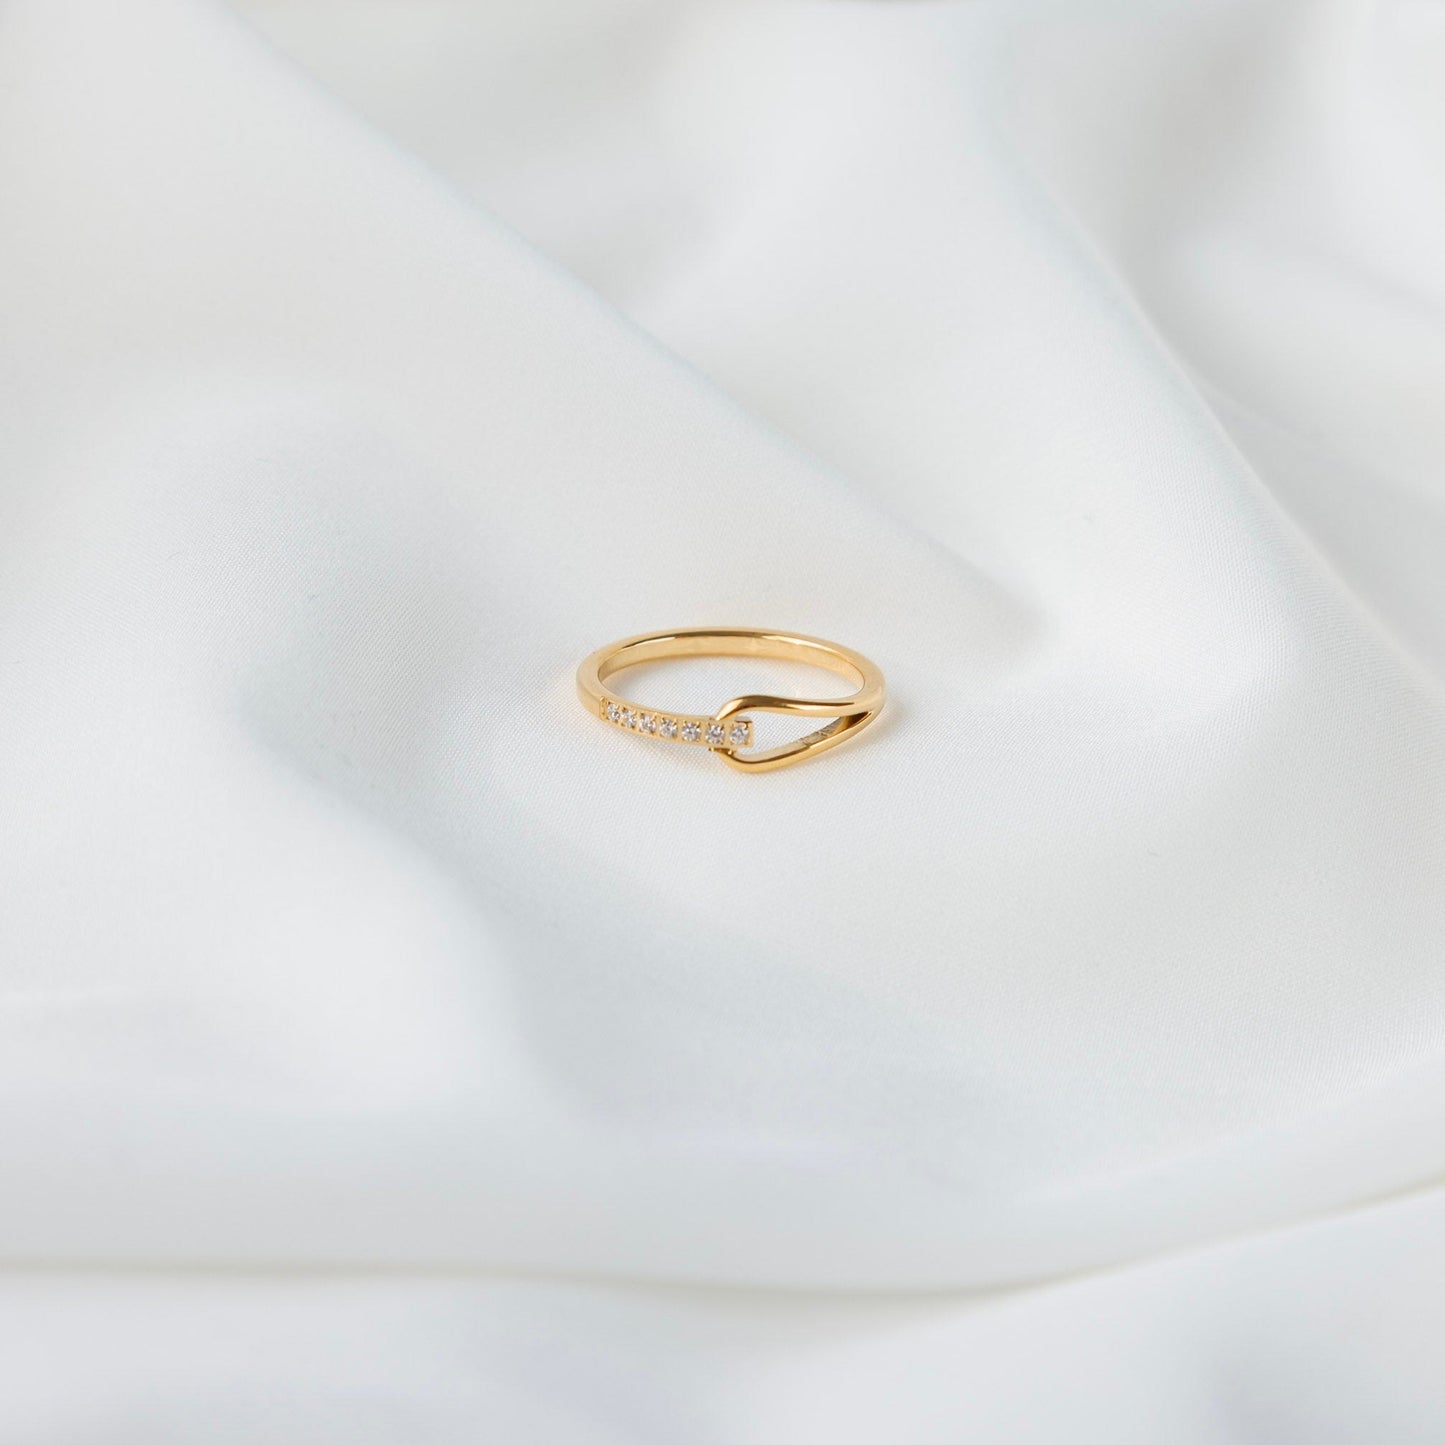 Everluxe Loop Band Ring - Gold